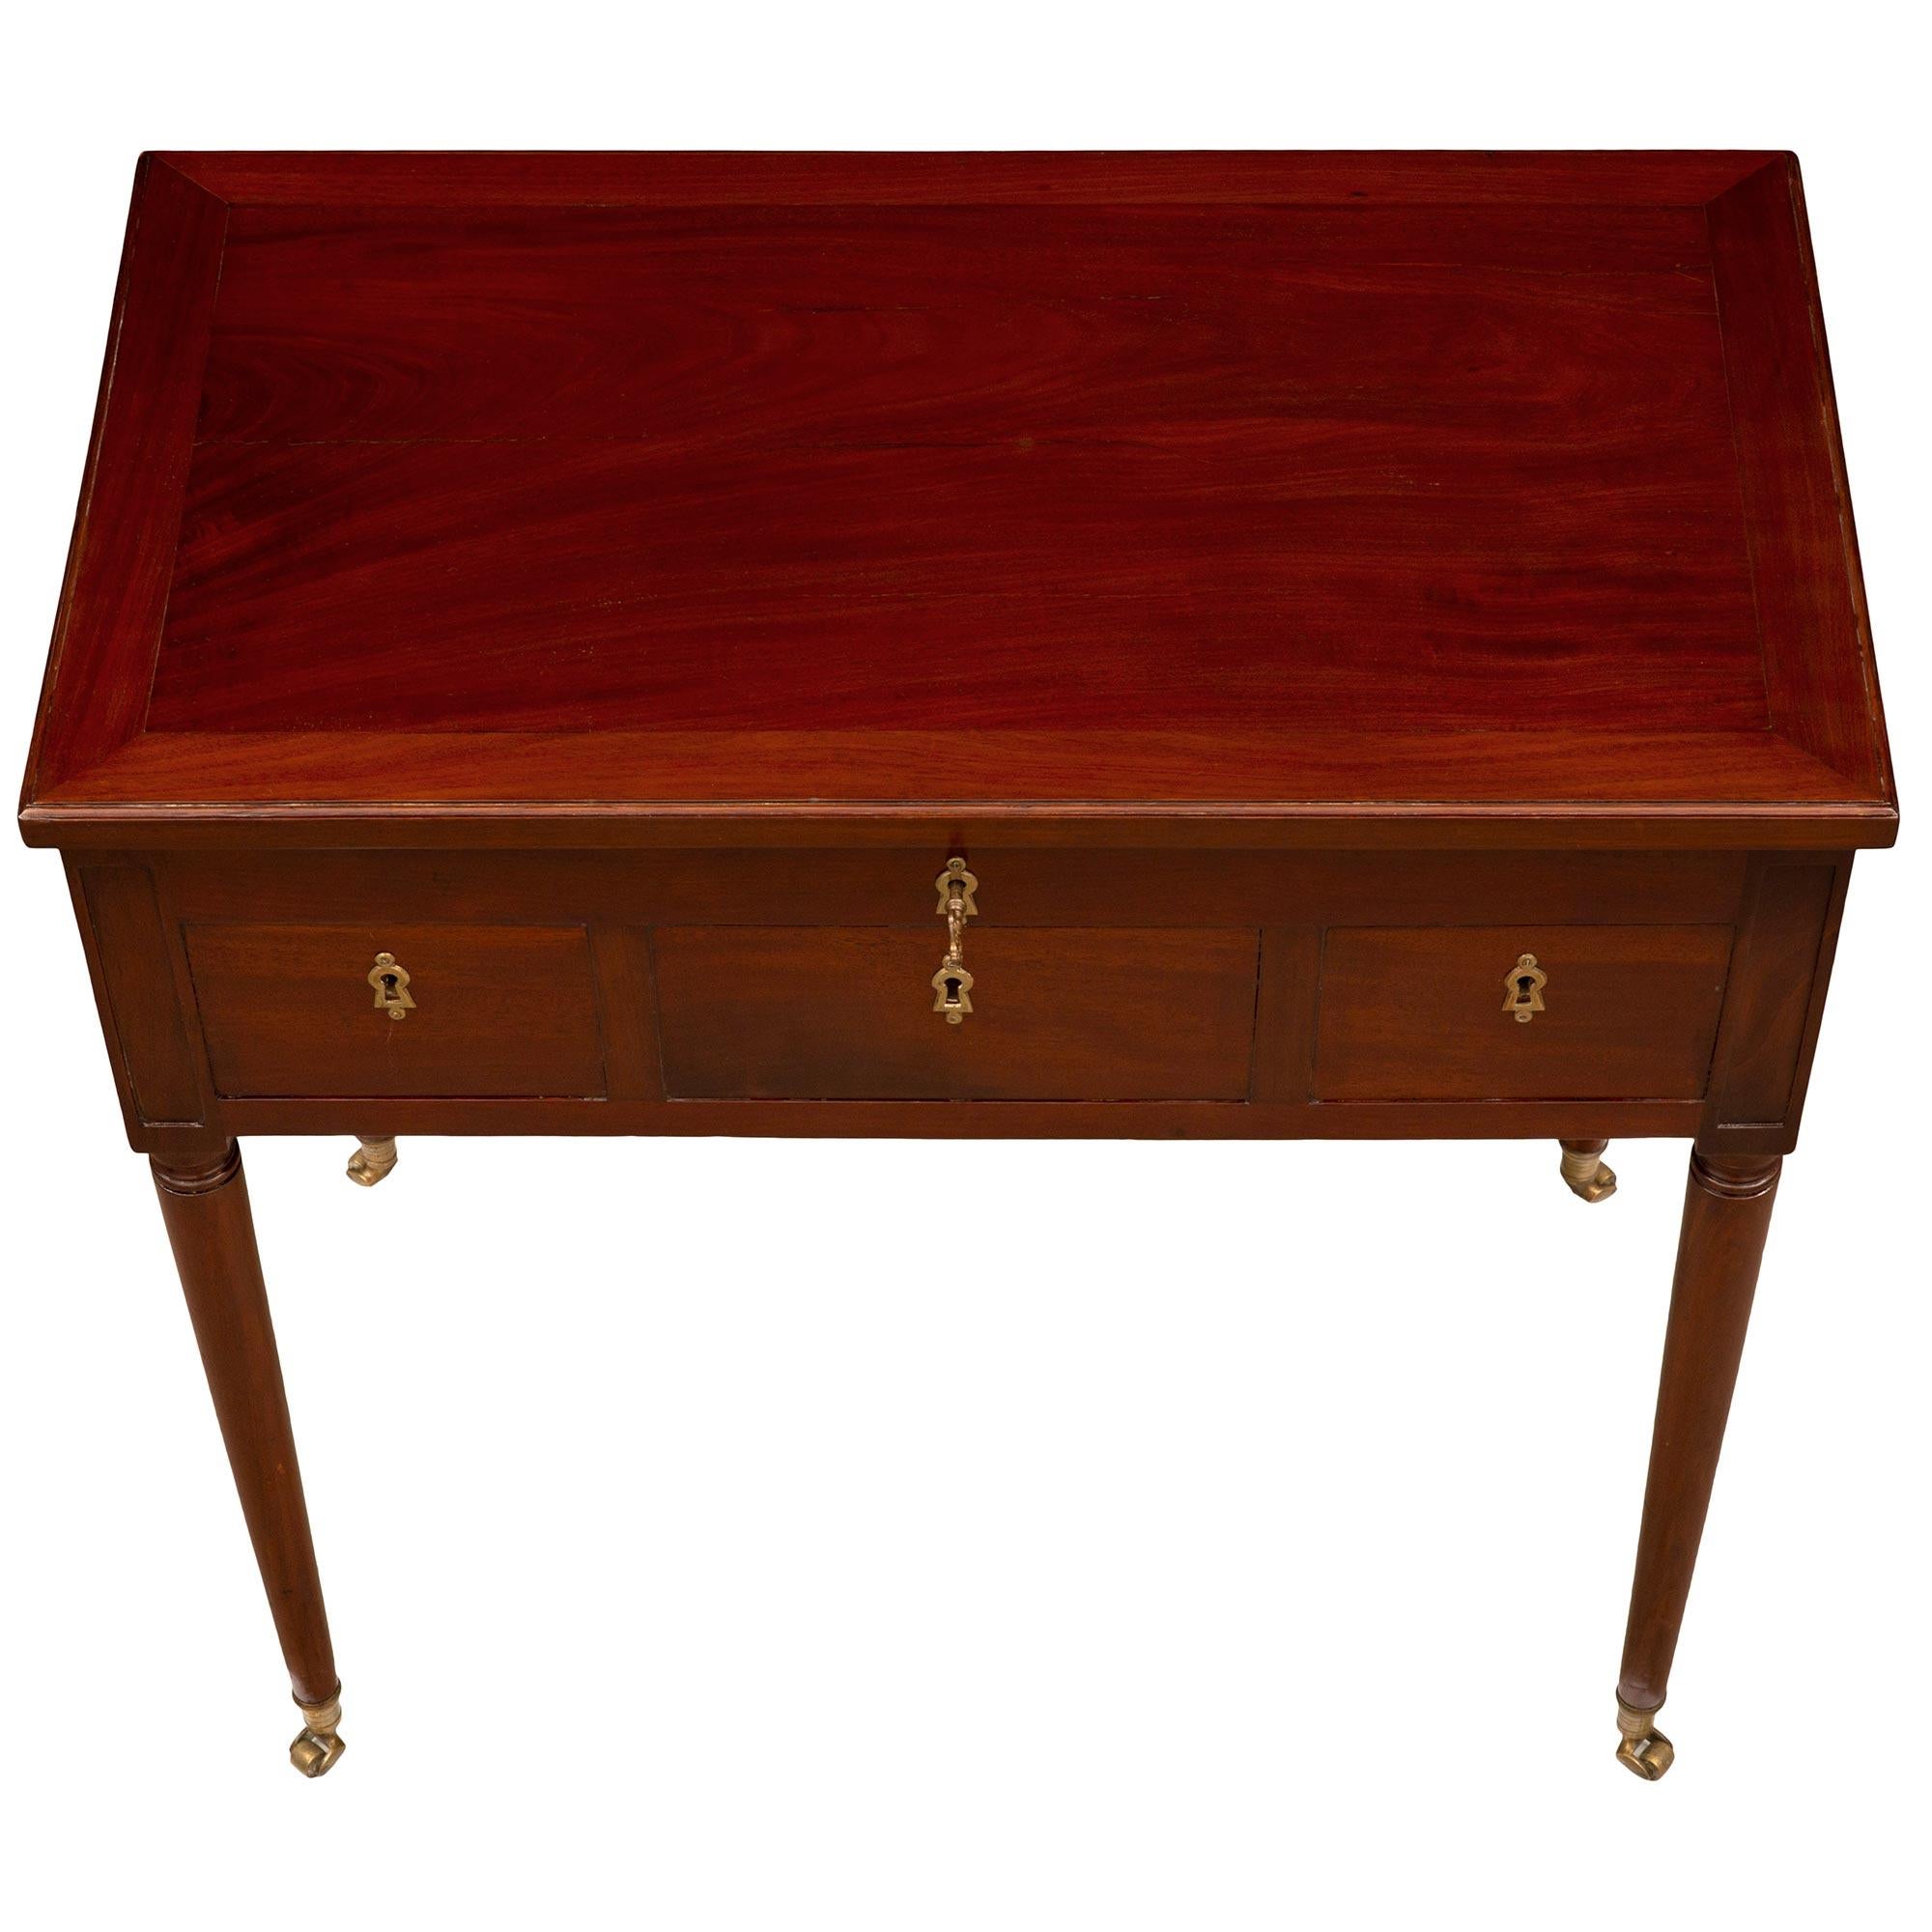 A unique and most elegant French 18th Louis XVI period Mahogany vanity table. The table is raised by slender circular tapered legs retaining their fine original ormolu casters. The straight apron displays three faux drawers each decorated with